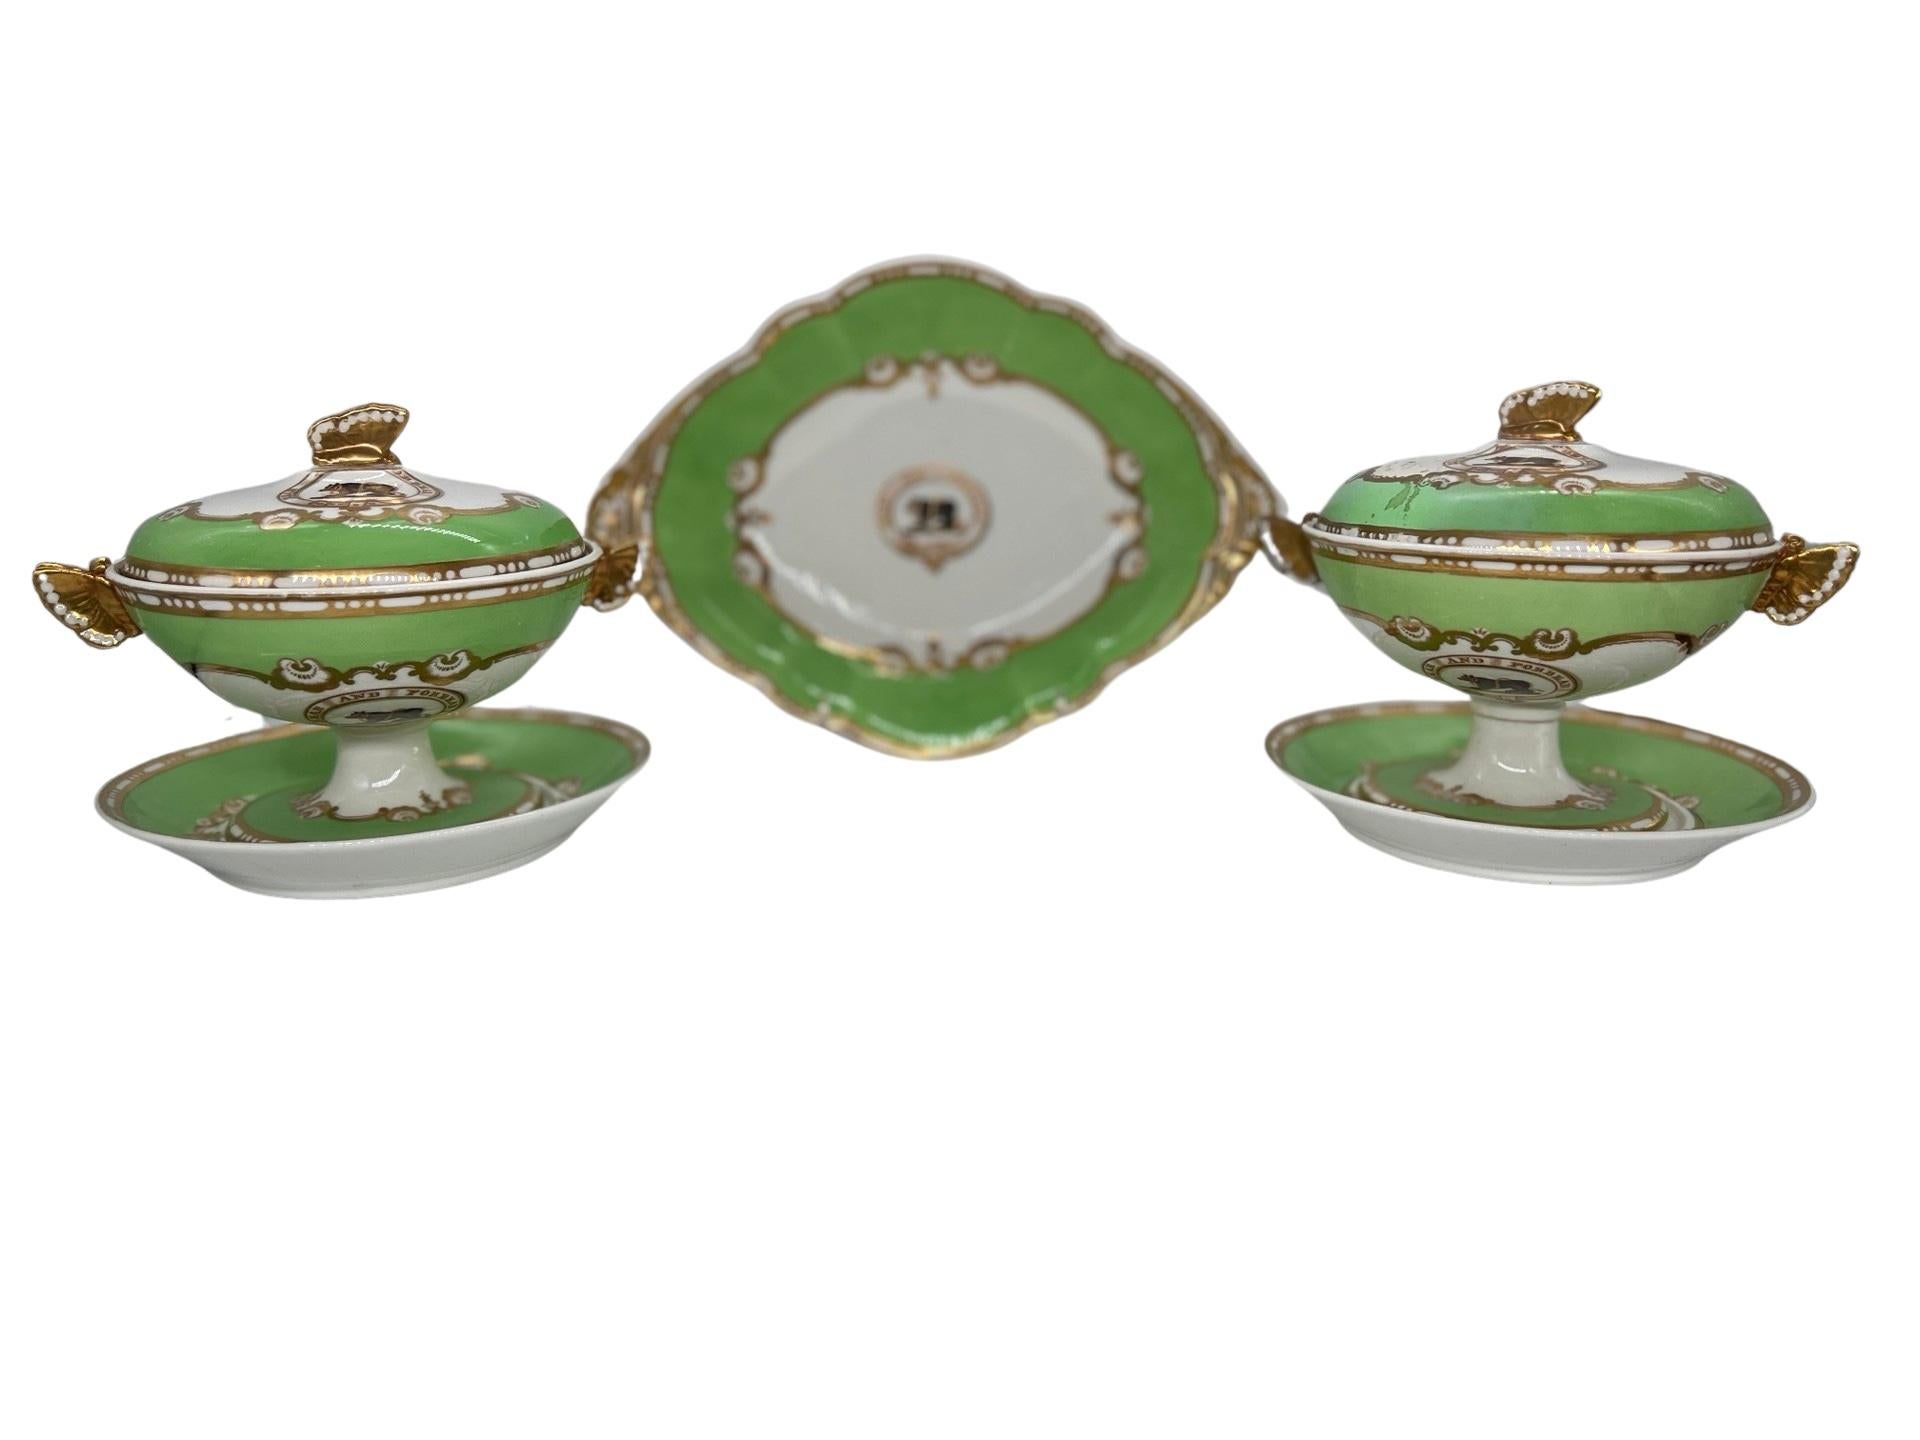 Spode (England, Founded 1770), Felspar Porcelain (Introduced 1821), circa 1840.

A 3 piece grouping of antique Spode Felspar porcelain including a pair of covered sauce tureens and dessert tray. Each piece with an ivy green colored base, accented by